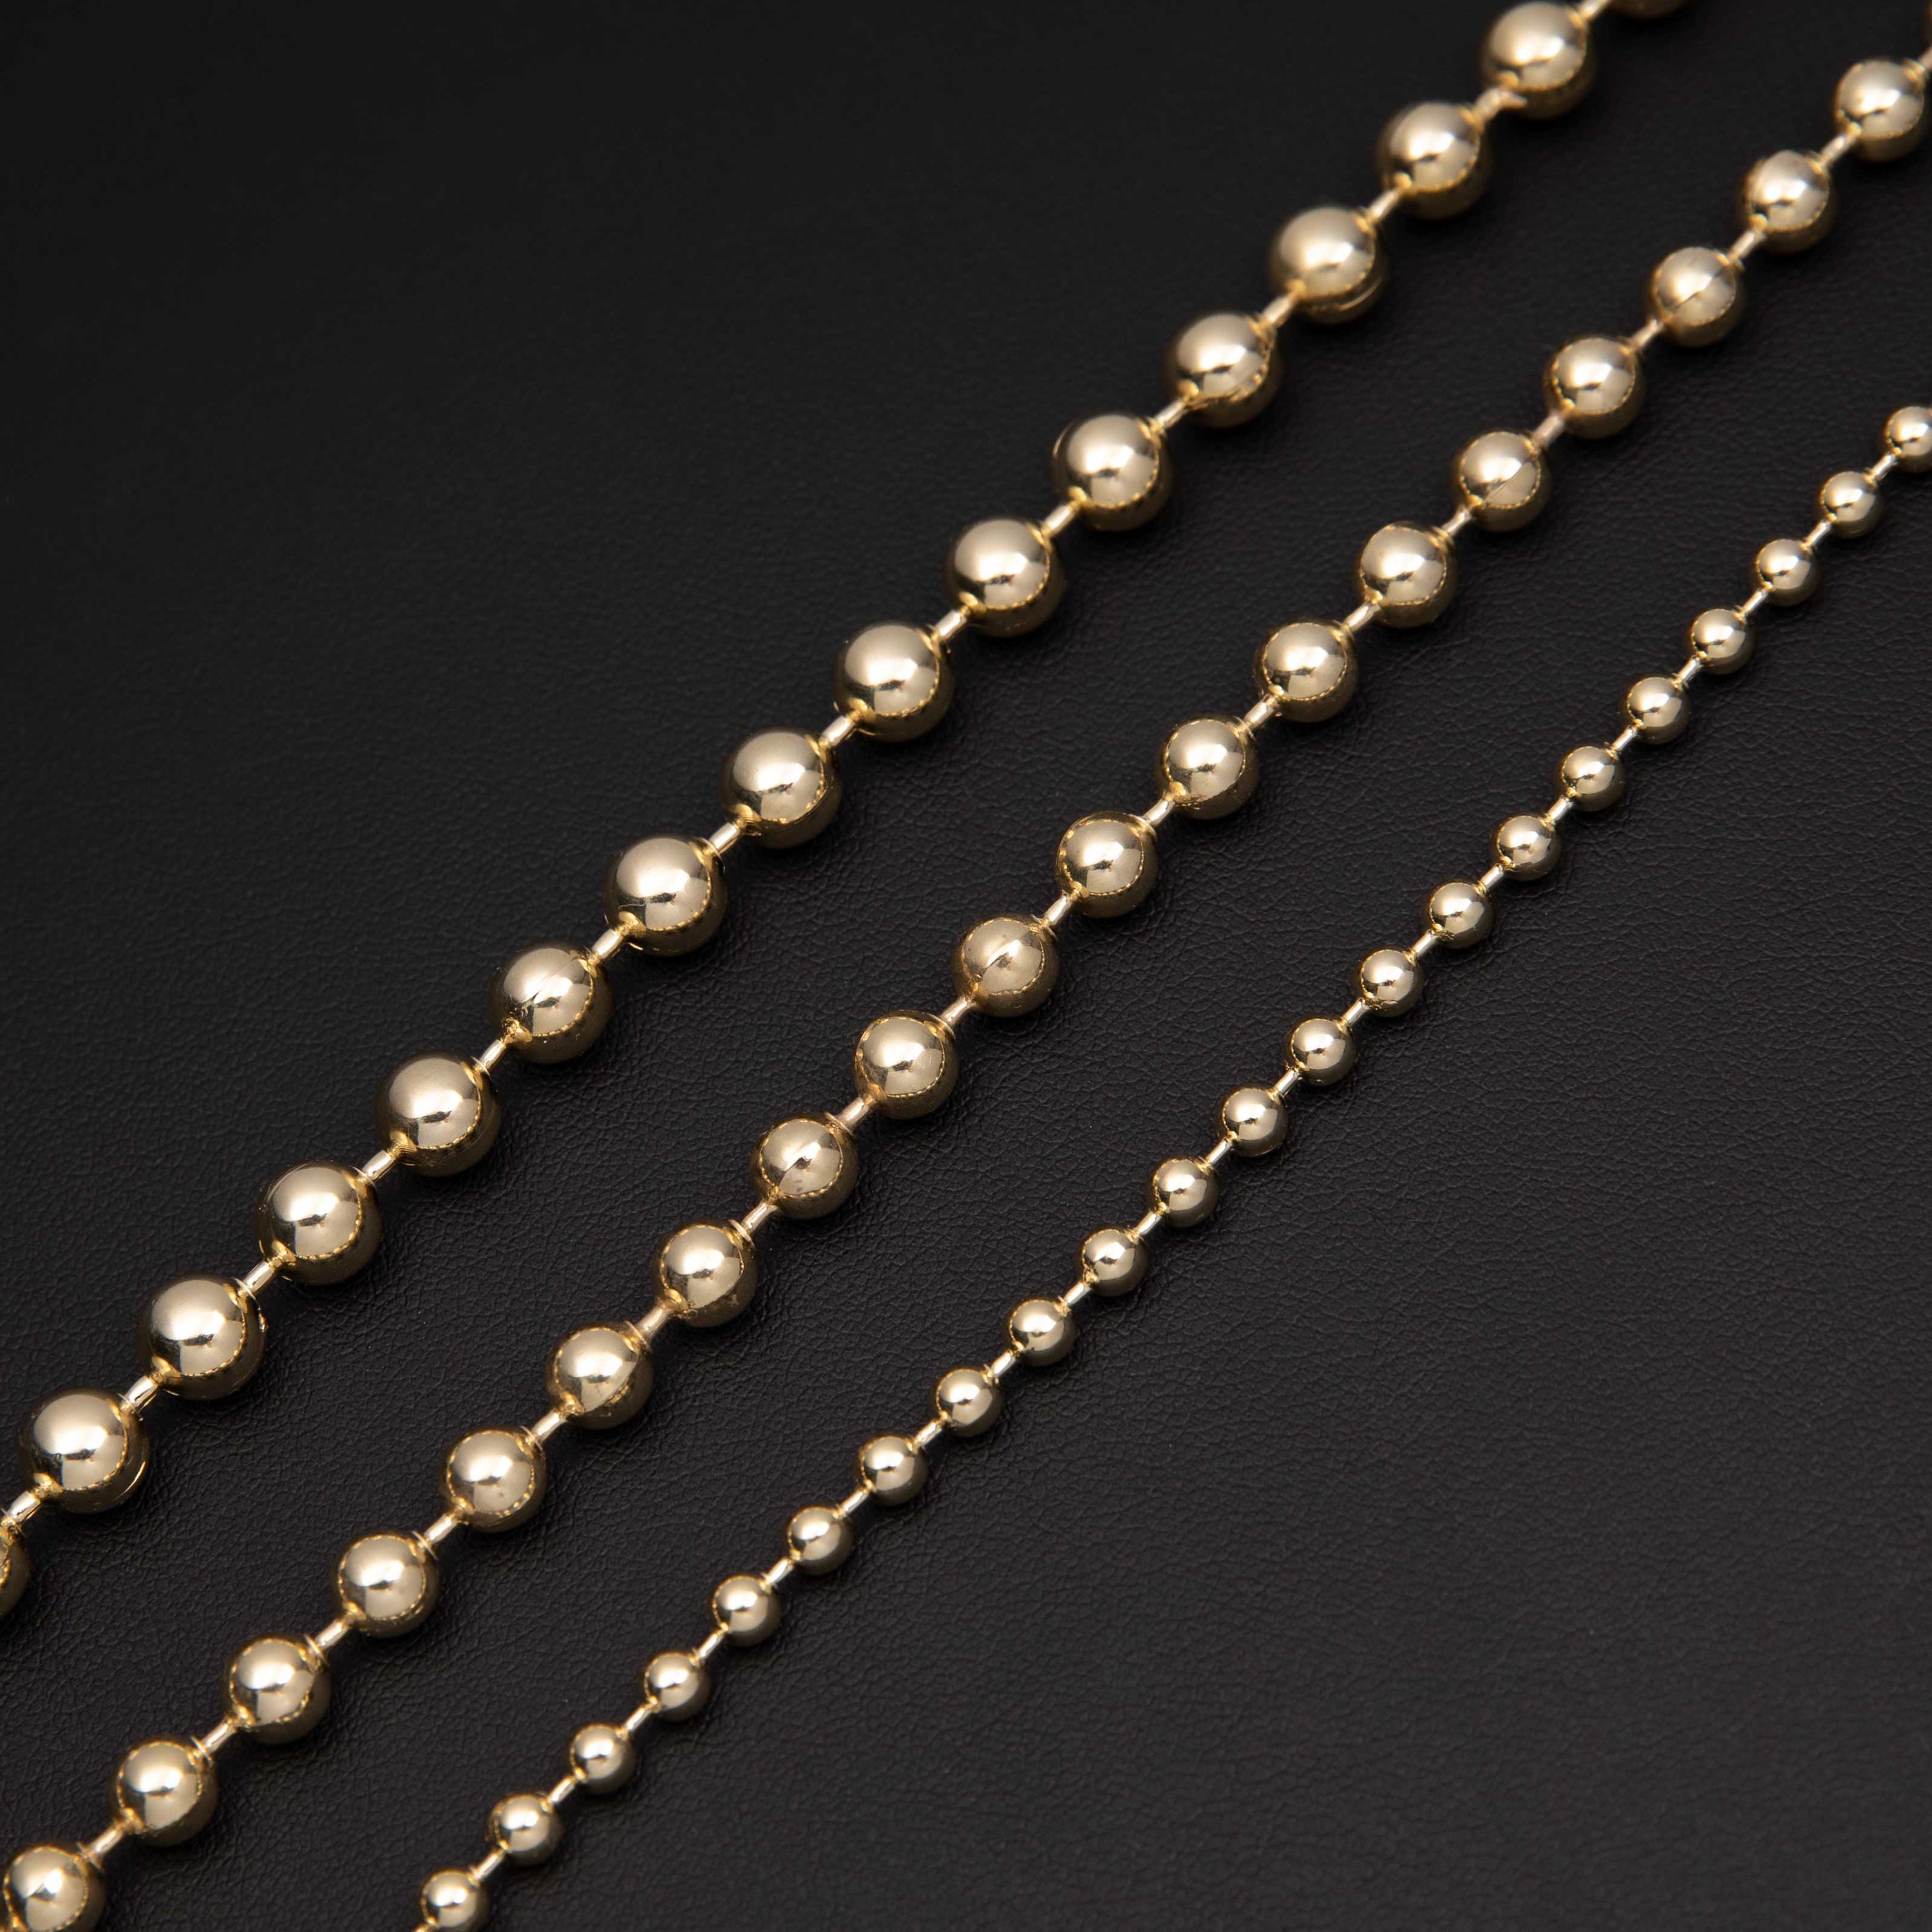 14K Solid Rose Gold Ball Bead Chain 2mm 26 Inches - 9.10 Grams (Long) / Rose Gold - NYC Luxury